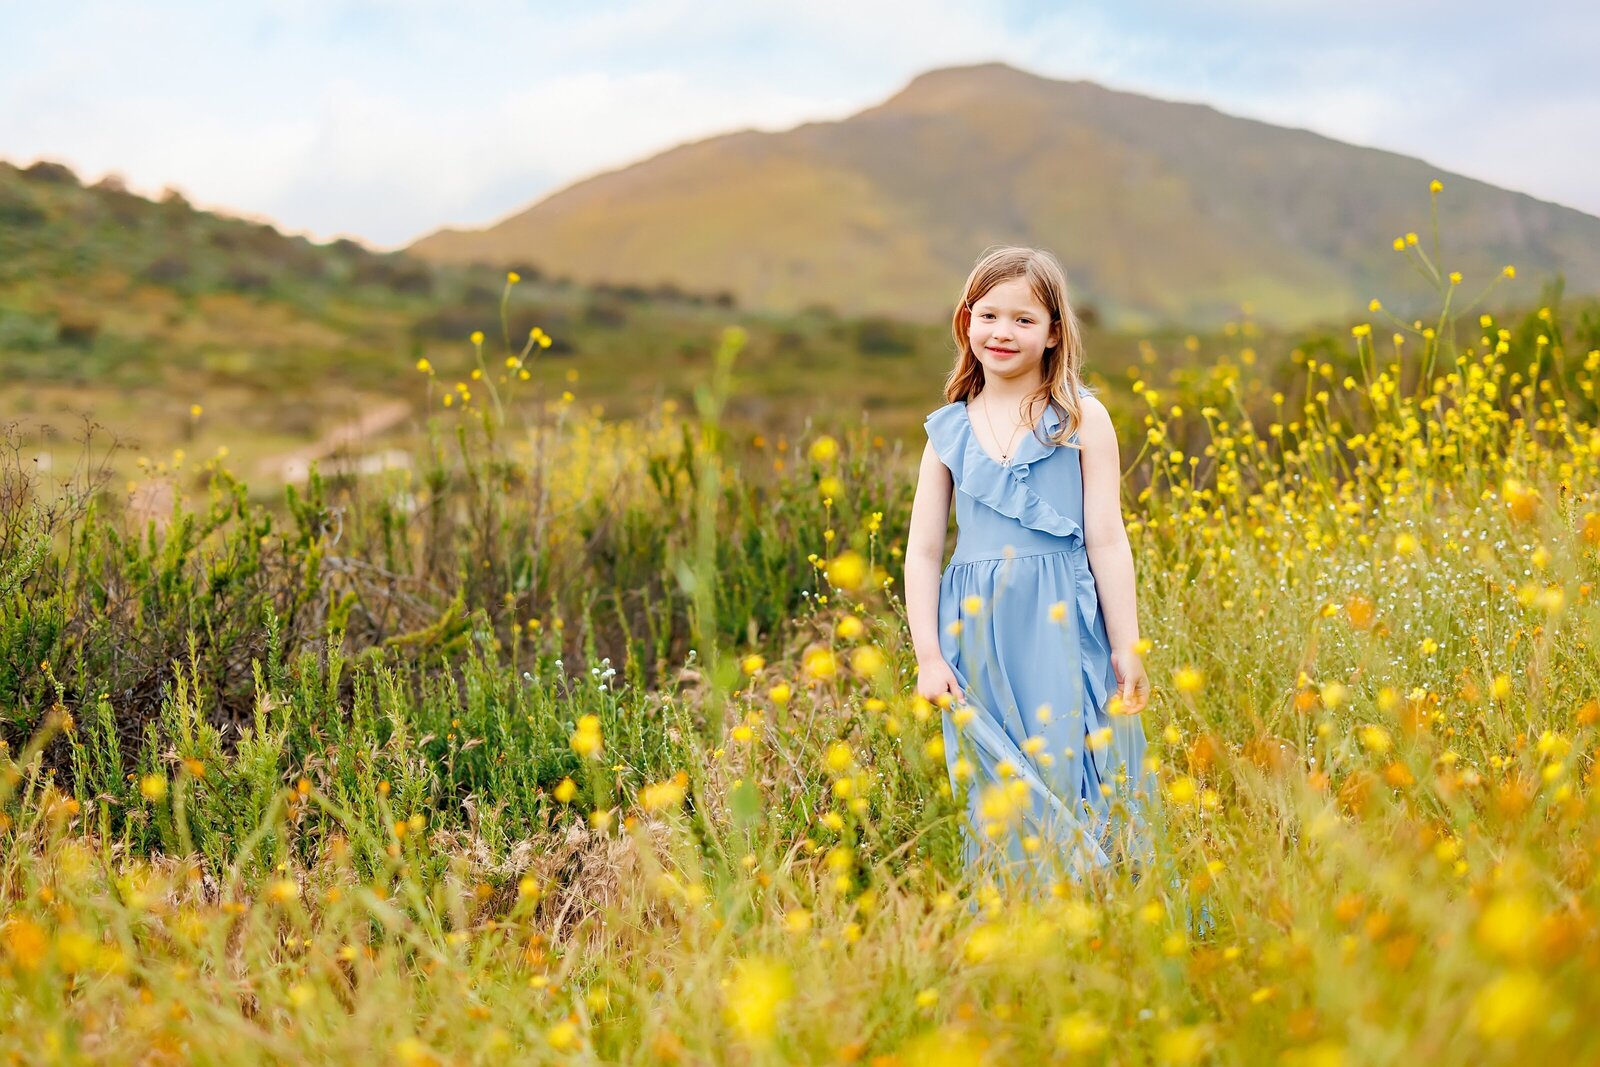 Portrait of girl wearing a blue dress among wildflowers and a mountain in the background in north county San Diego